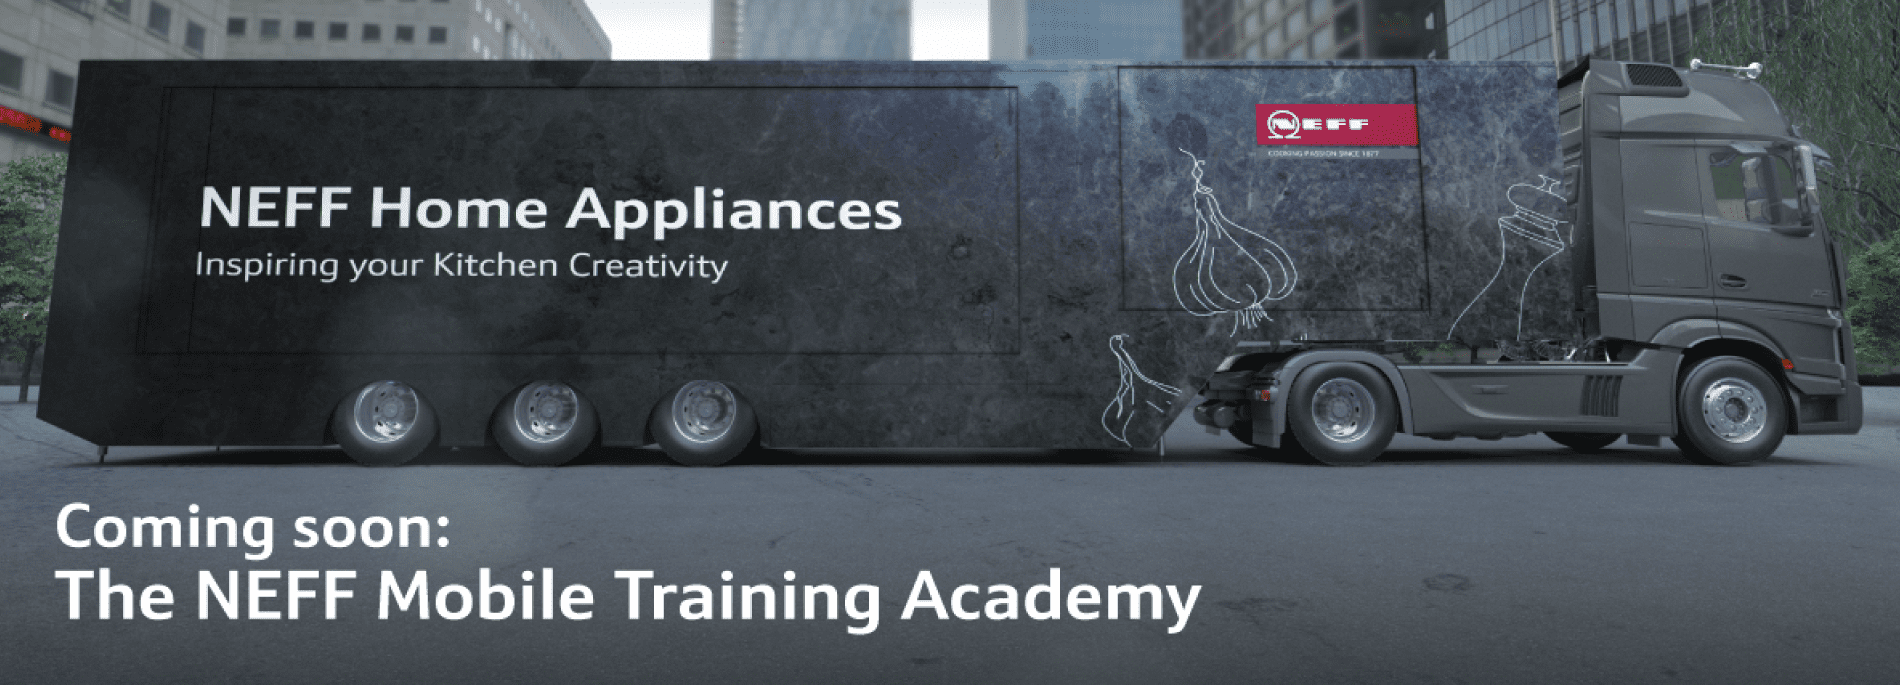 Don’t miss Neff’s Mobile Training Academy at Housing Units!